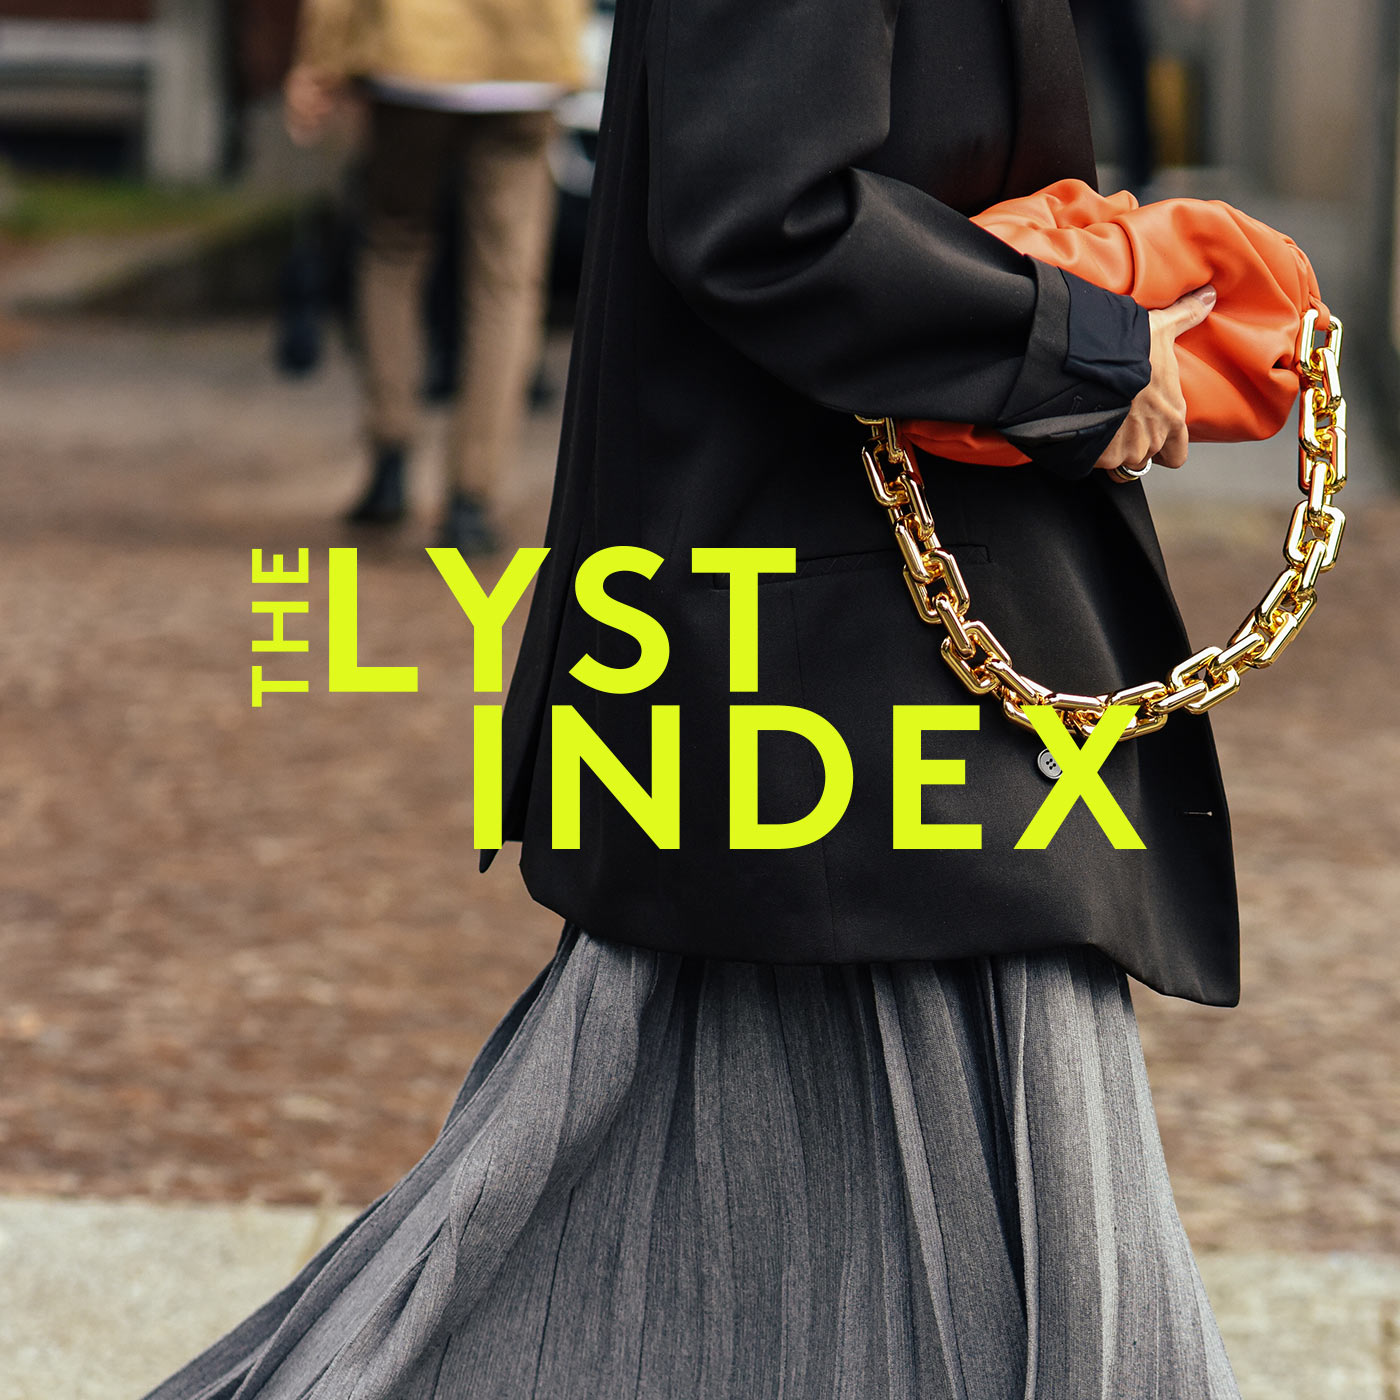 The Lyst Index: Fashion's Hottest Brands and Products Q3 2020